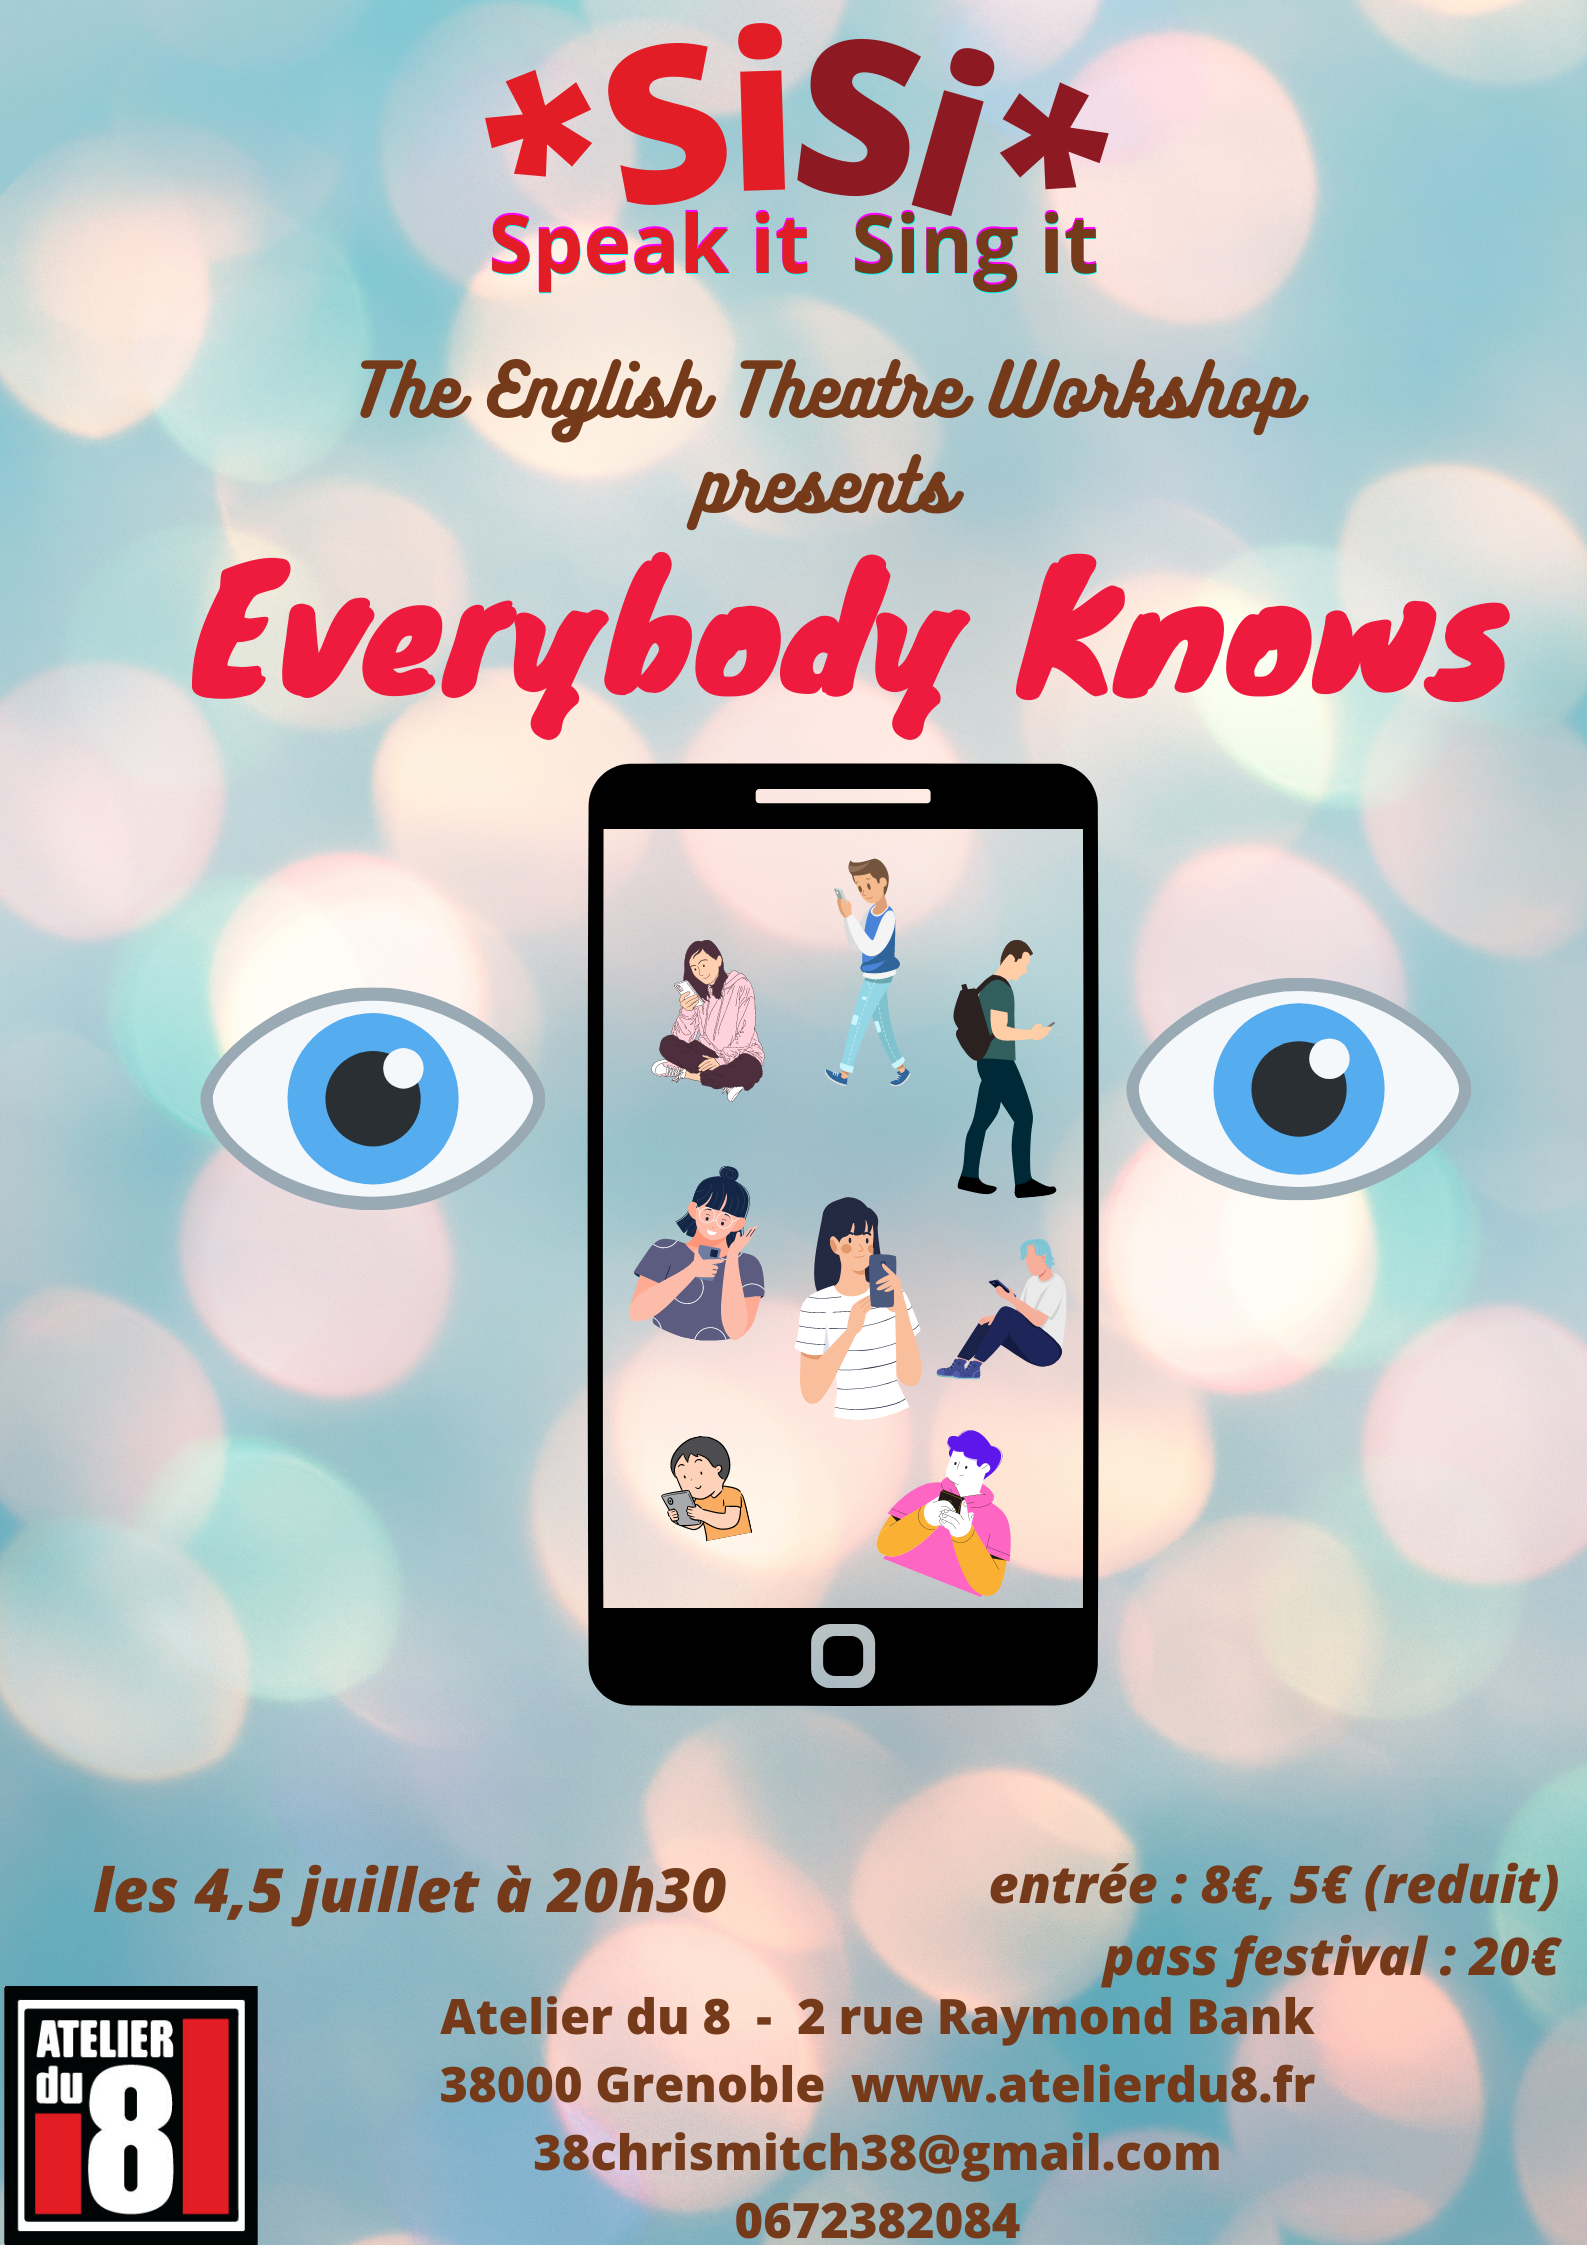 Everybody knows - English Theatre Workshop 2 - Festival SiSi